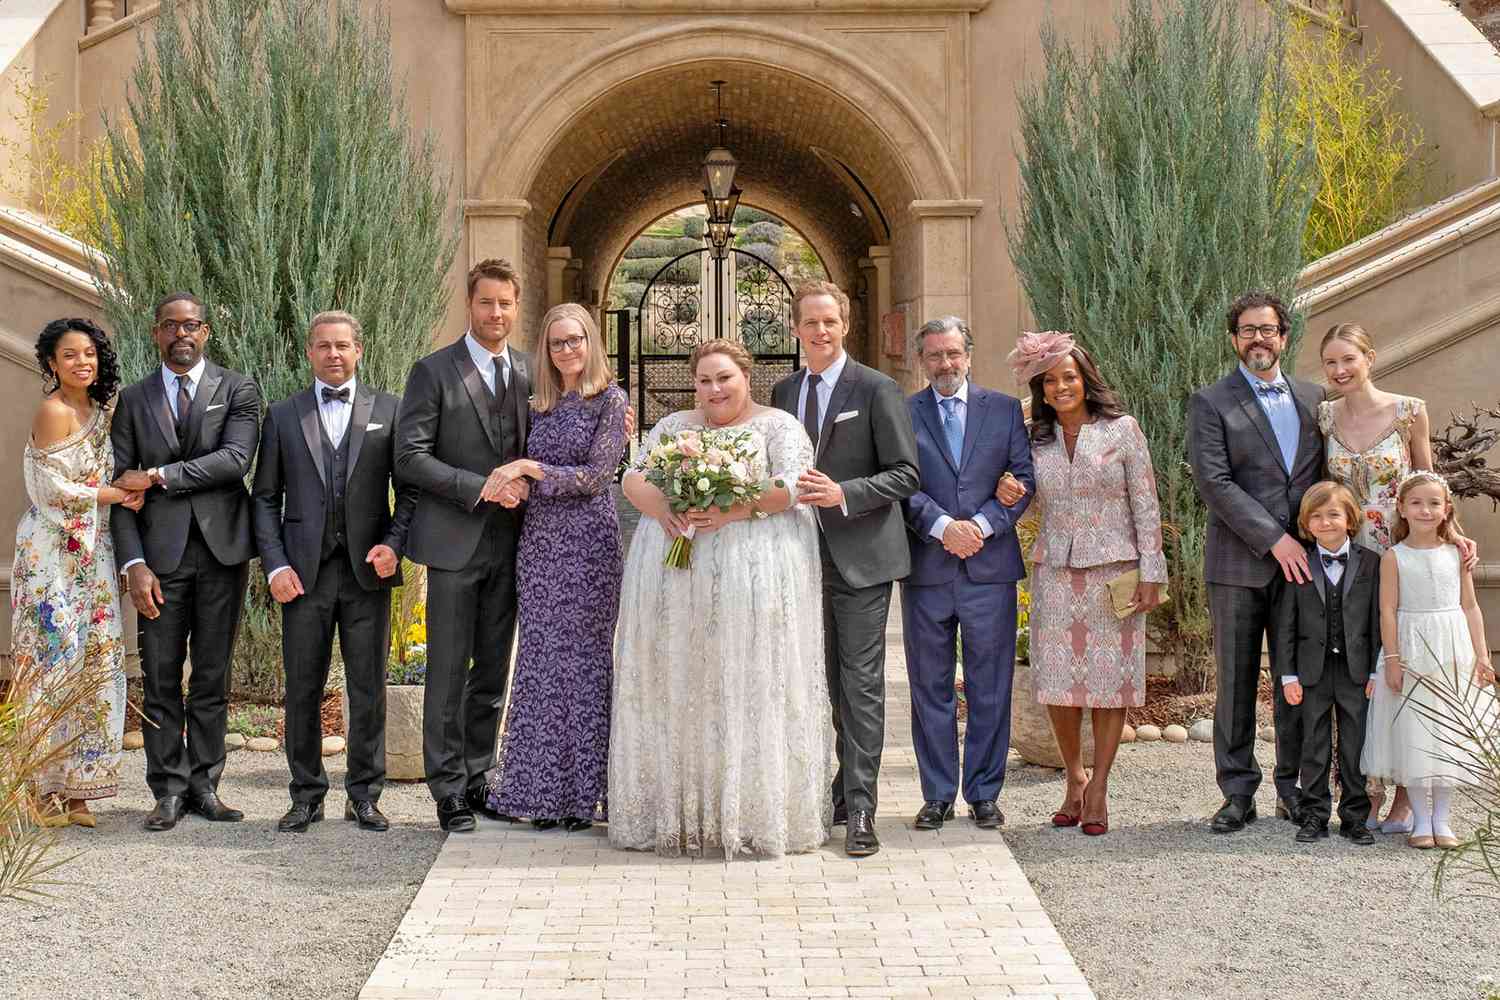 THIS IS US -- “Day of the Wedding” Episode 613 -- Pictured: (l-r) Susan Kelechi Watson as Beth, Sterling K. Brown as Randall, Jon Huertas as Miguel, Justin Hartley as Kevin, Mandy Moore as Rebecca, Chrissy Metz as Kate, Chris Geere as Phillip, Griffin Dunne as Nicky, Vanessa Bell Calloway as Edie, Adam Korson as Elijah, Kellan Tetlow as Nicky, Caitlin Thompson as Madison, Callie Carlin Ogden as Franny -- (Photo by: Ron Batzdorff/NBC)